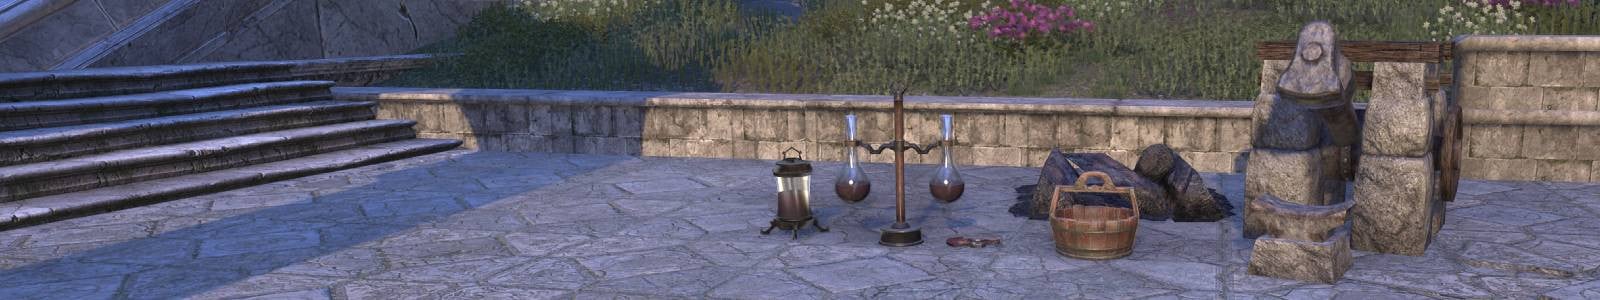 Riekling Tanning Rack, Stretched - ESO header